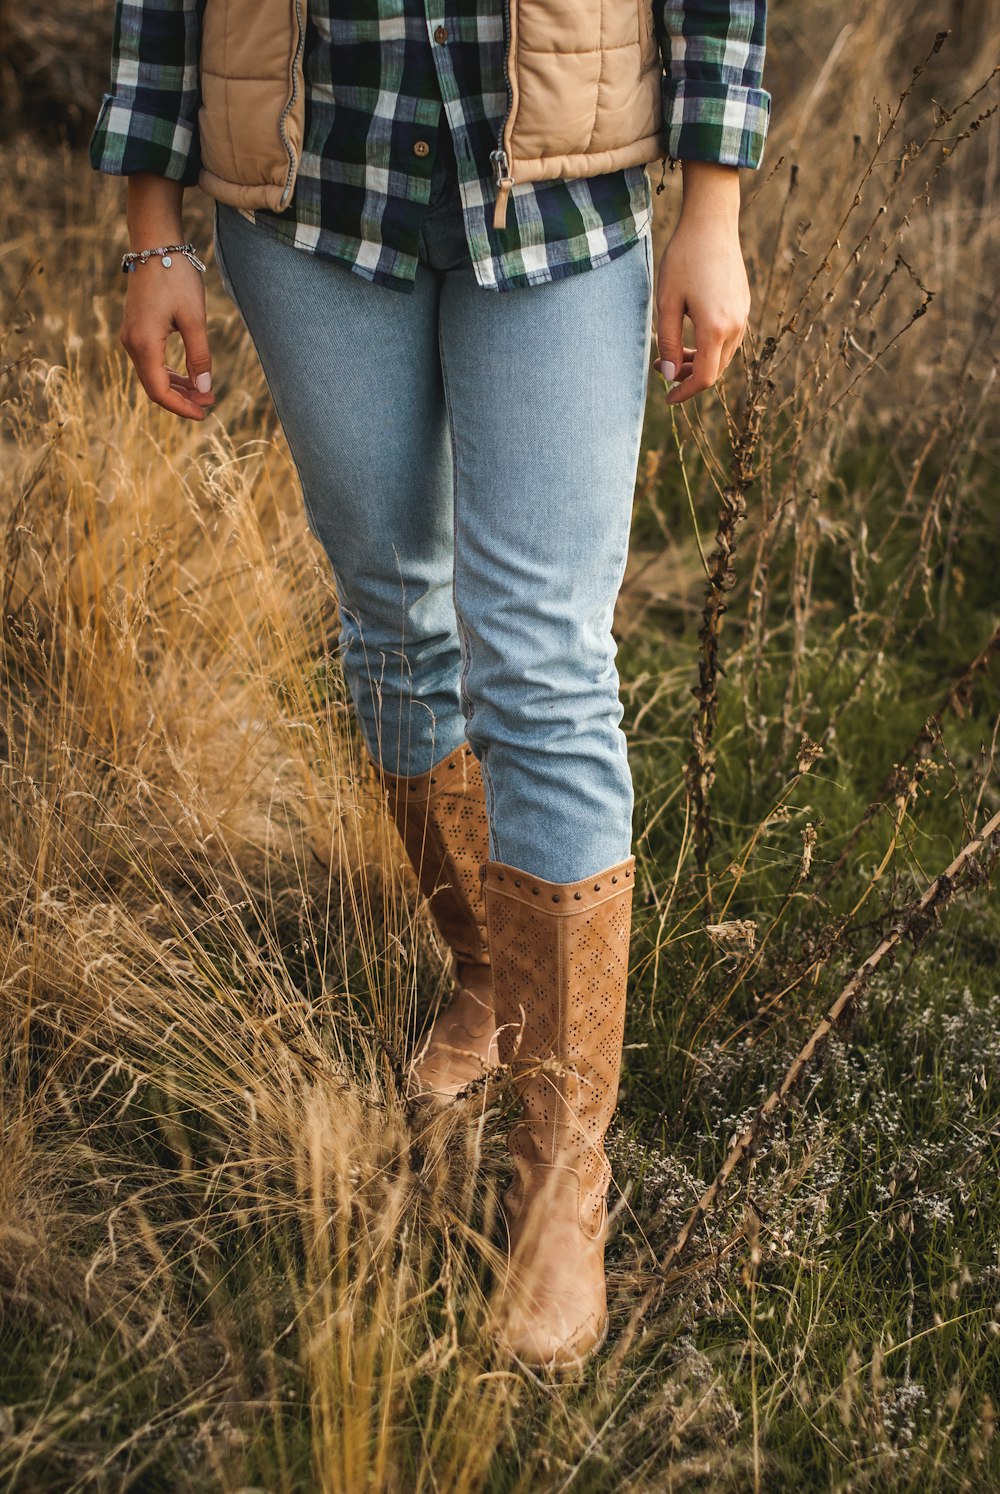 person in blue denim jeans and brown boots standing on green grass field during daytime